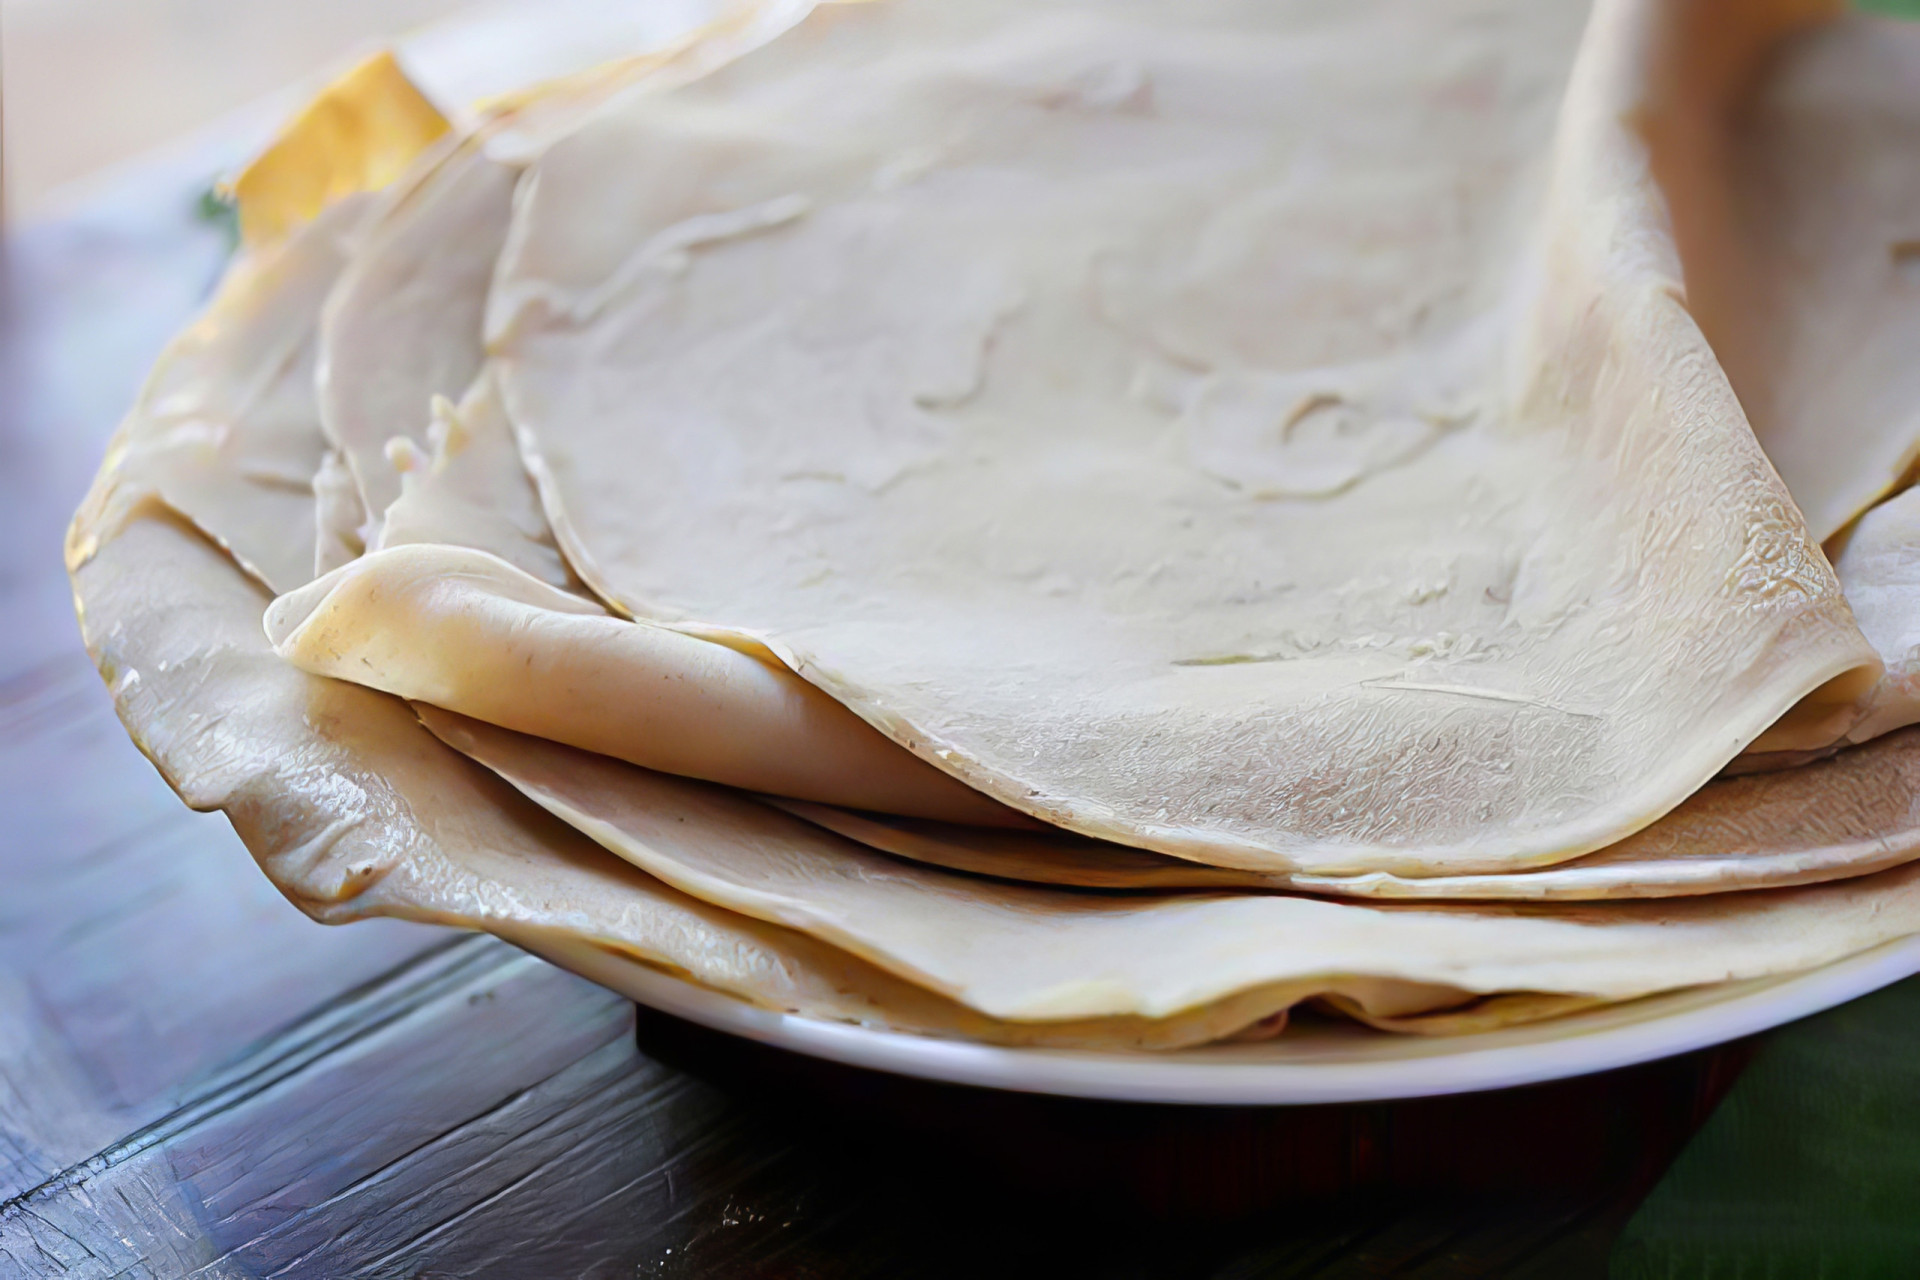 <p><span>A soft, doughy flatbread generally made with wheat flour, Gorraasa is eaten for breakfast, lunch, and dinner. Tear it into pieces, and use it to scoop up stews.</span></p><p><a href="https://www.msn.com/en-us/community/channel/vid-7xx8mnucu55yw63we9va2gwr7uihbxwc68fxqp25x6tg4ftibpra?cvid=94631541bc0f4f89bfd59158d696ad7e">Follow us and access great exclusive content every day</a></p>